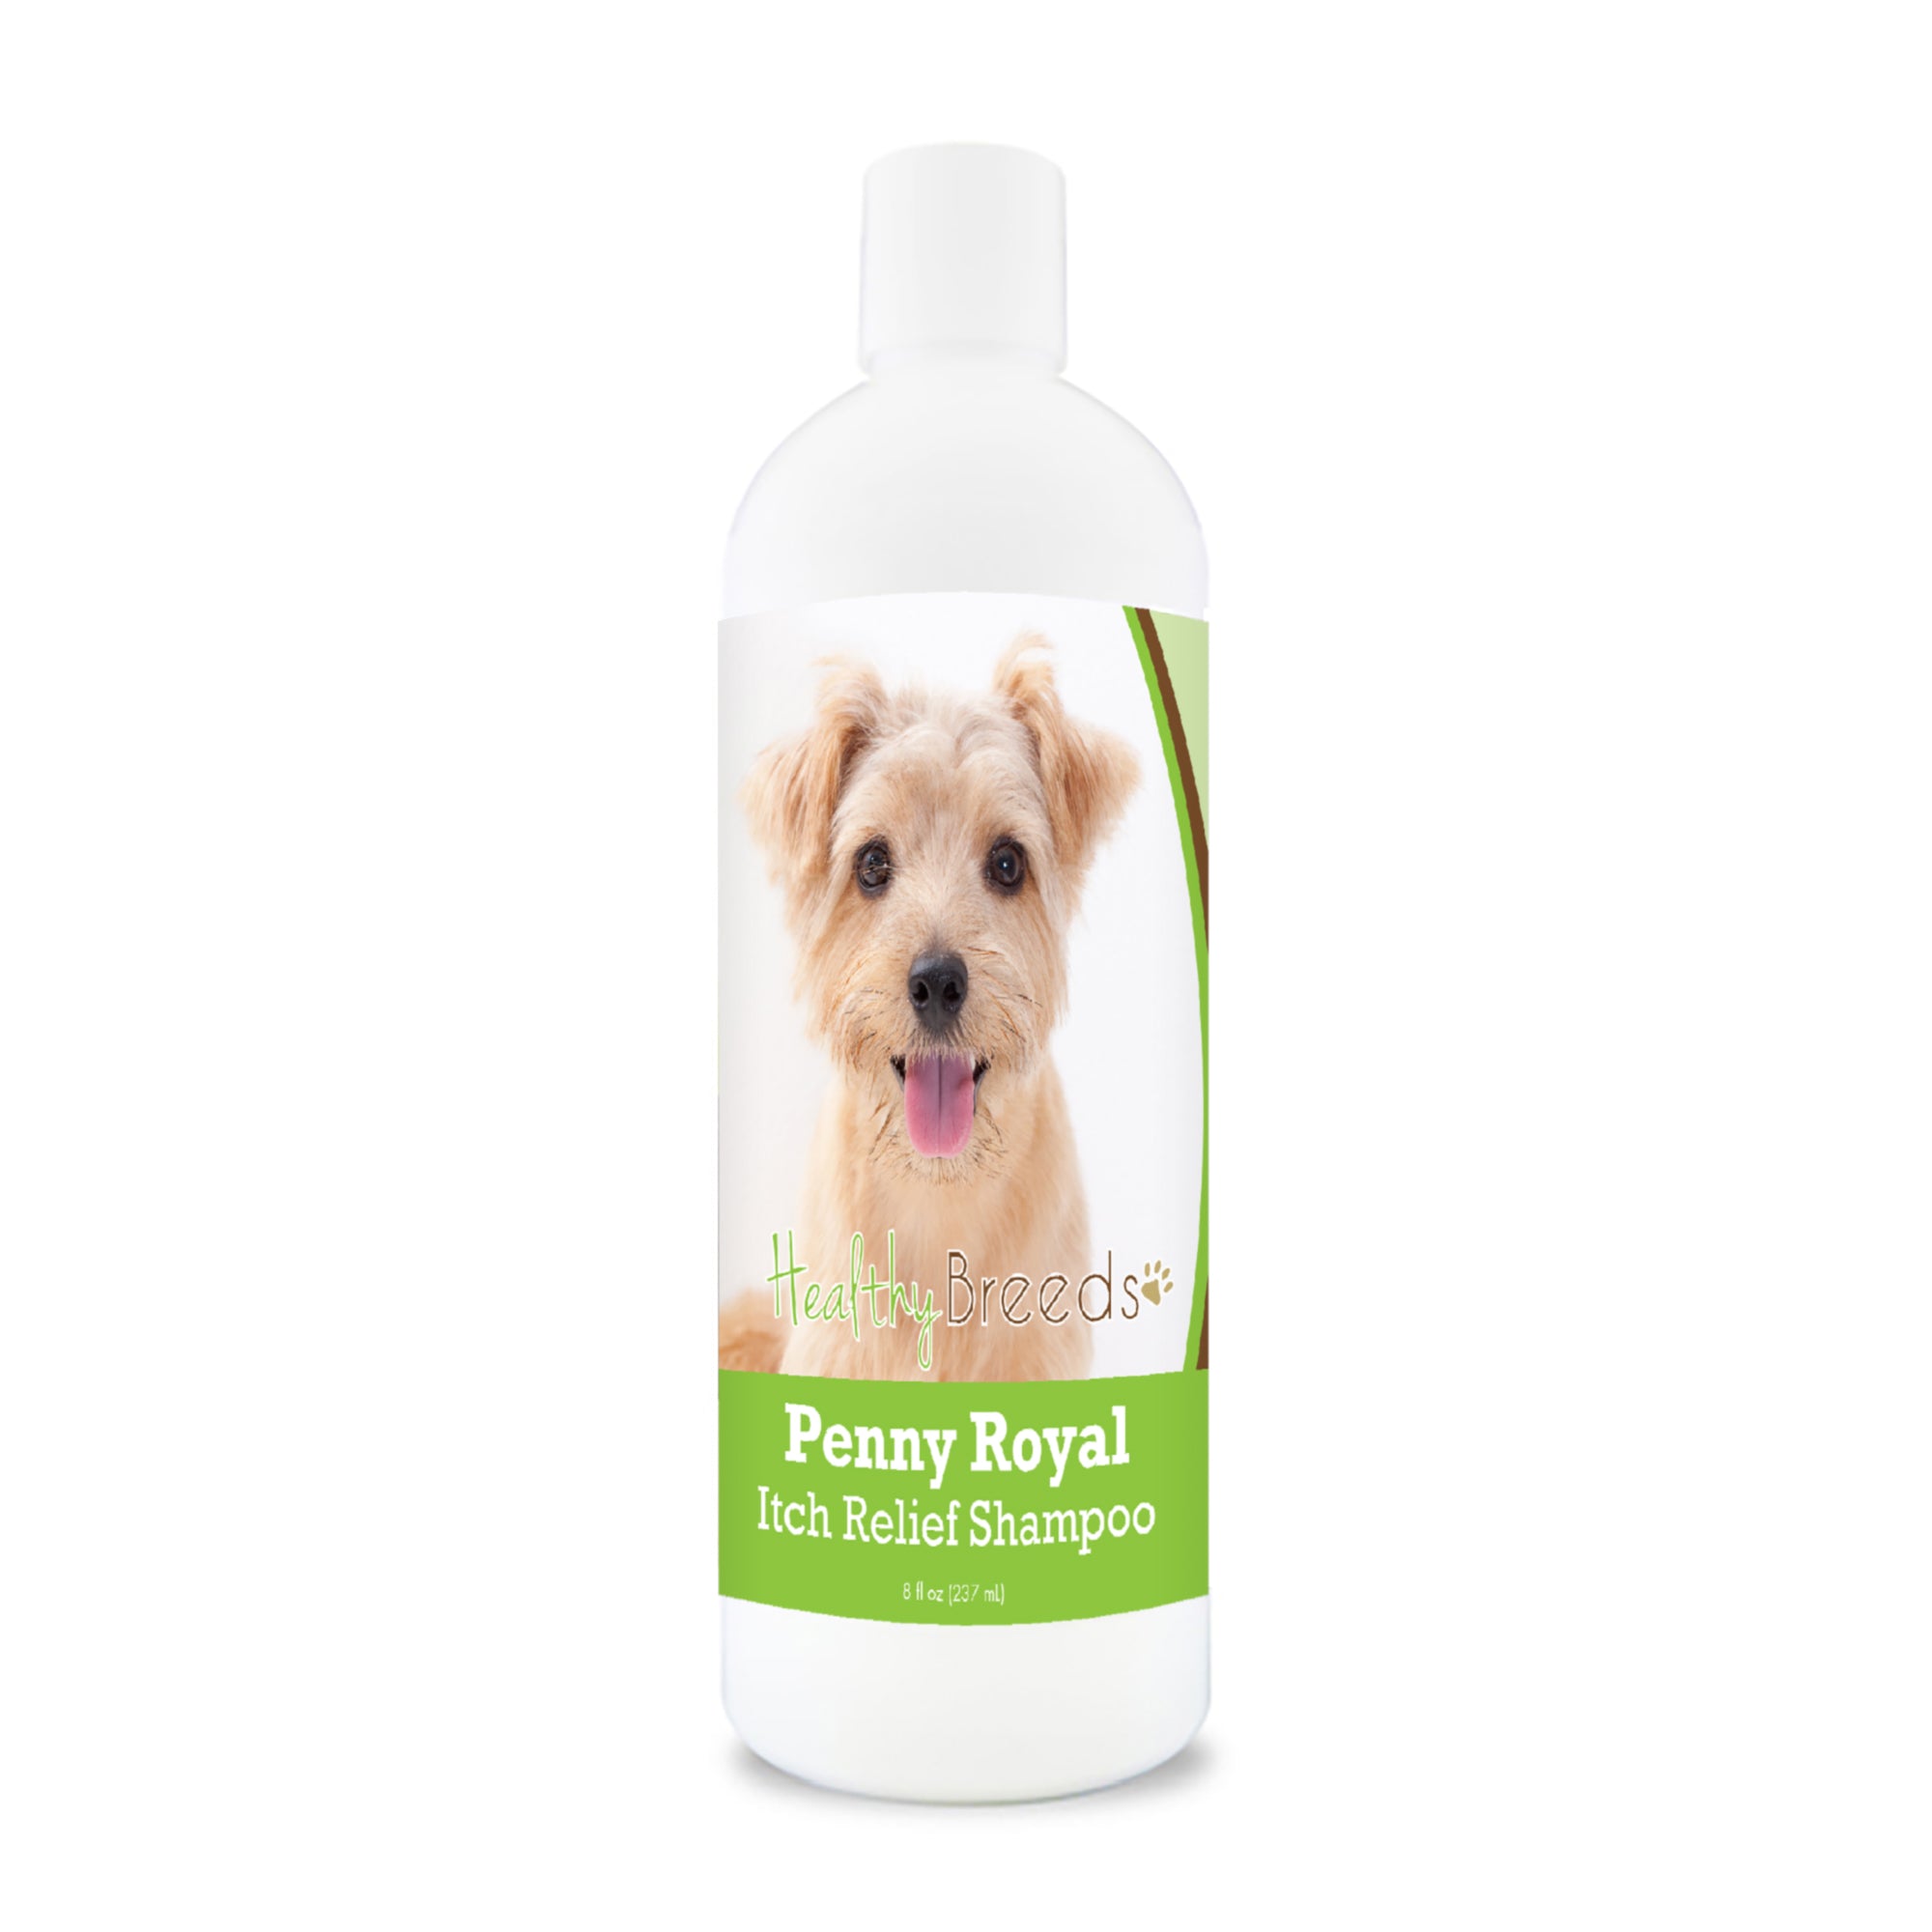 Norfolk Terrier Penny Royal Itch Relief Shampoo 8 oz